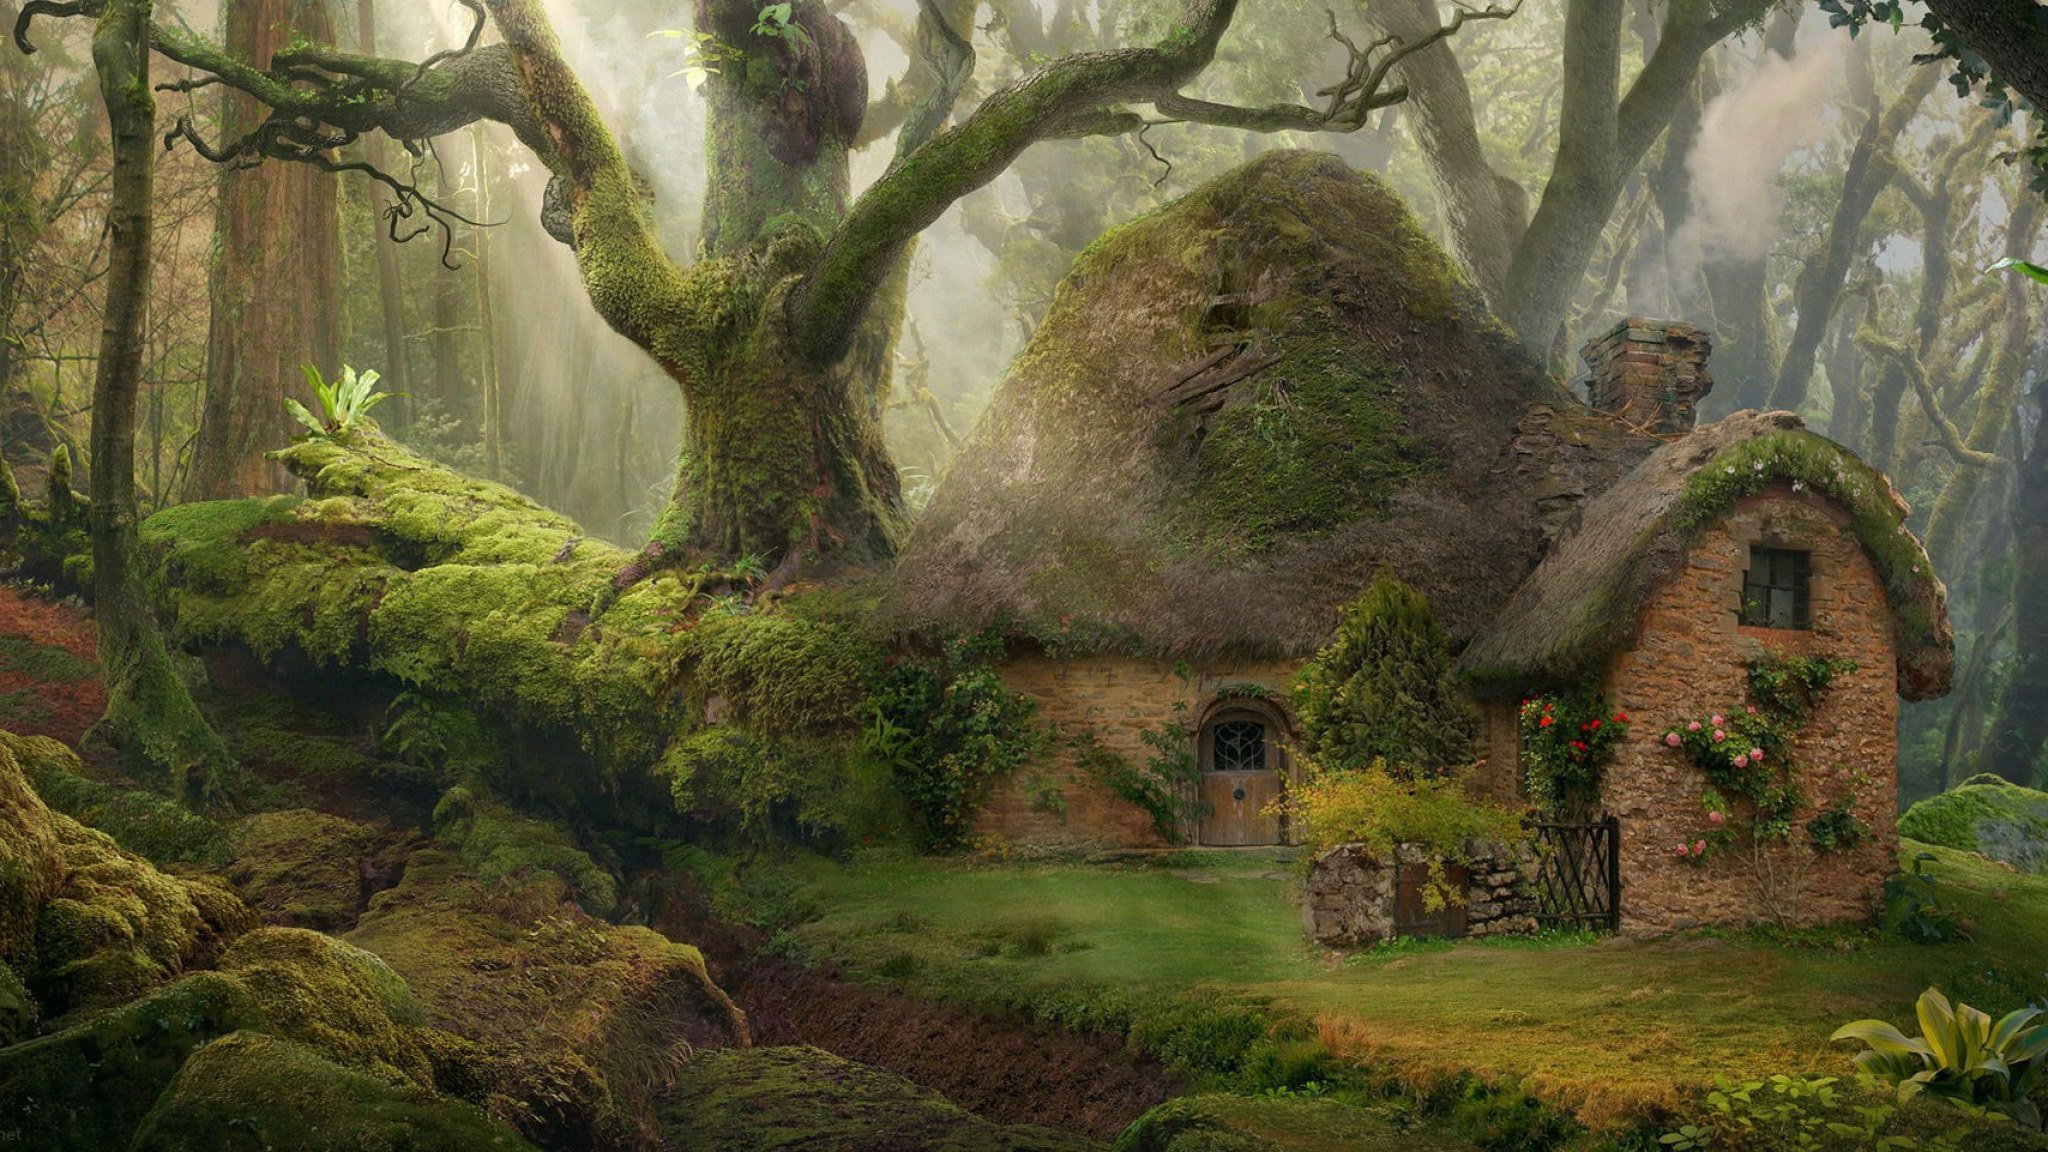 Brown Hobbit House Wallpaper, Nature, Forest, Fantasy Art, Tree, Plant • Wallpaper For You